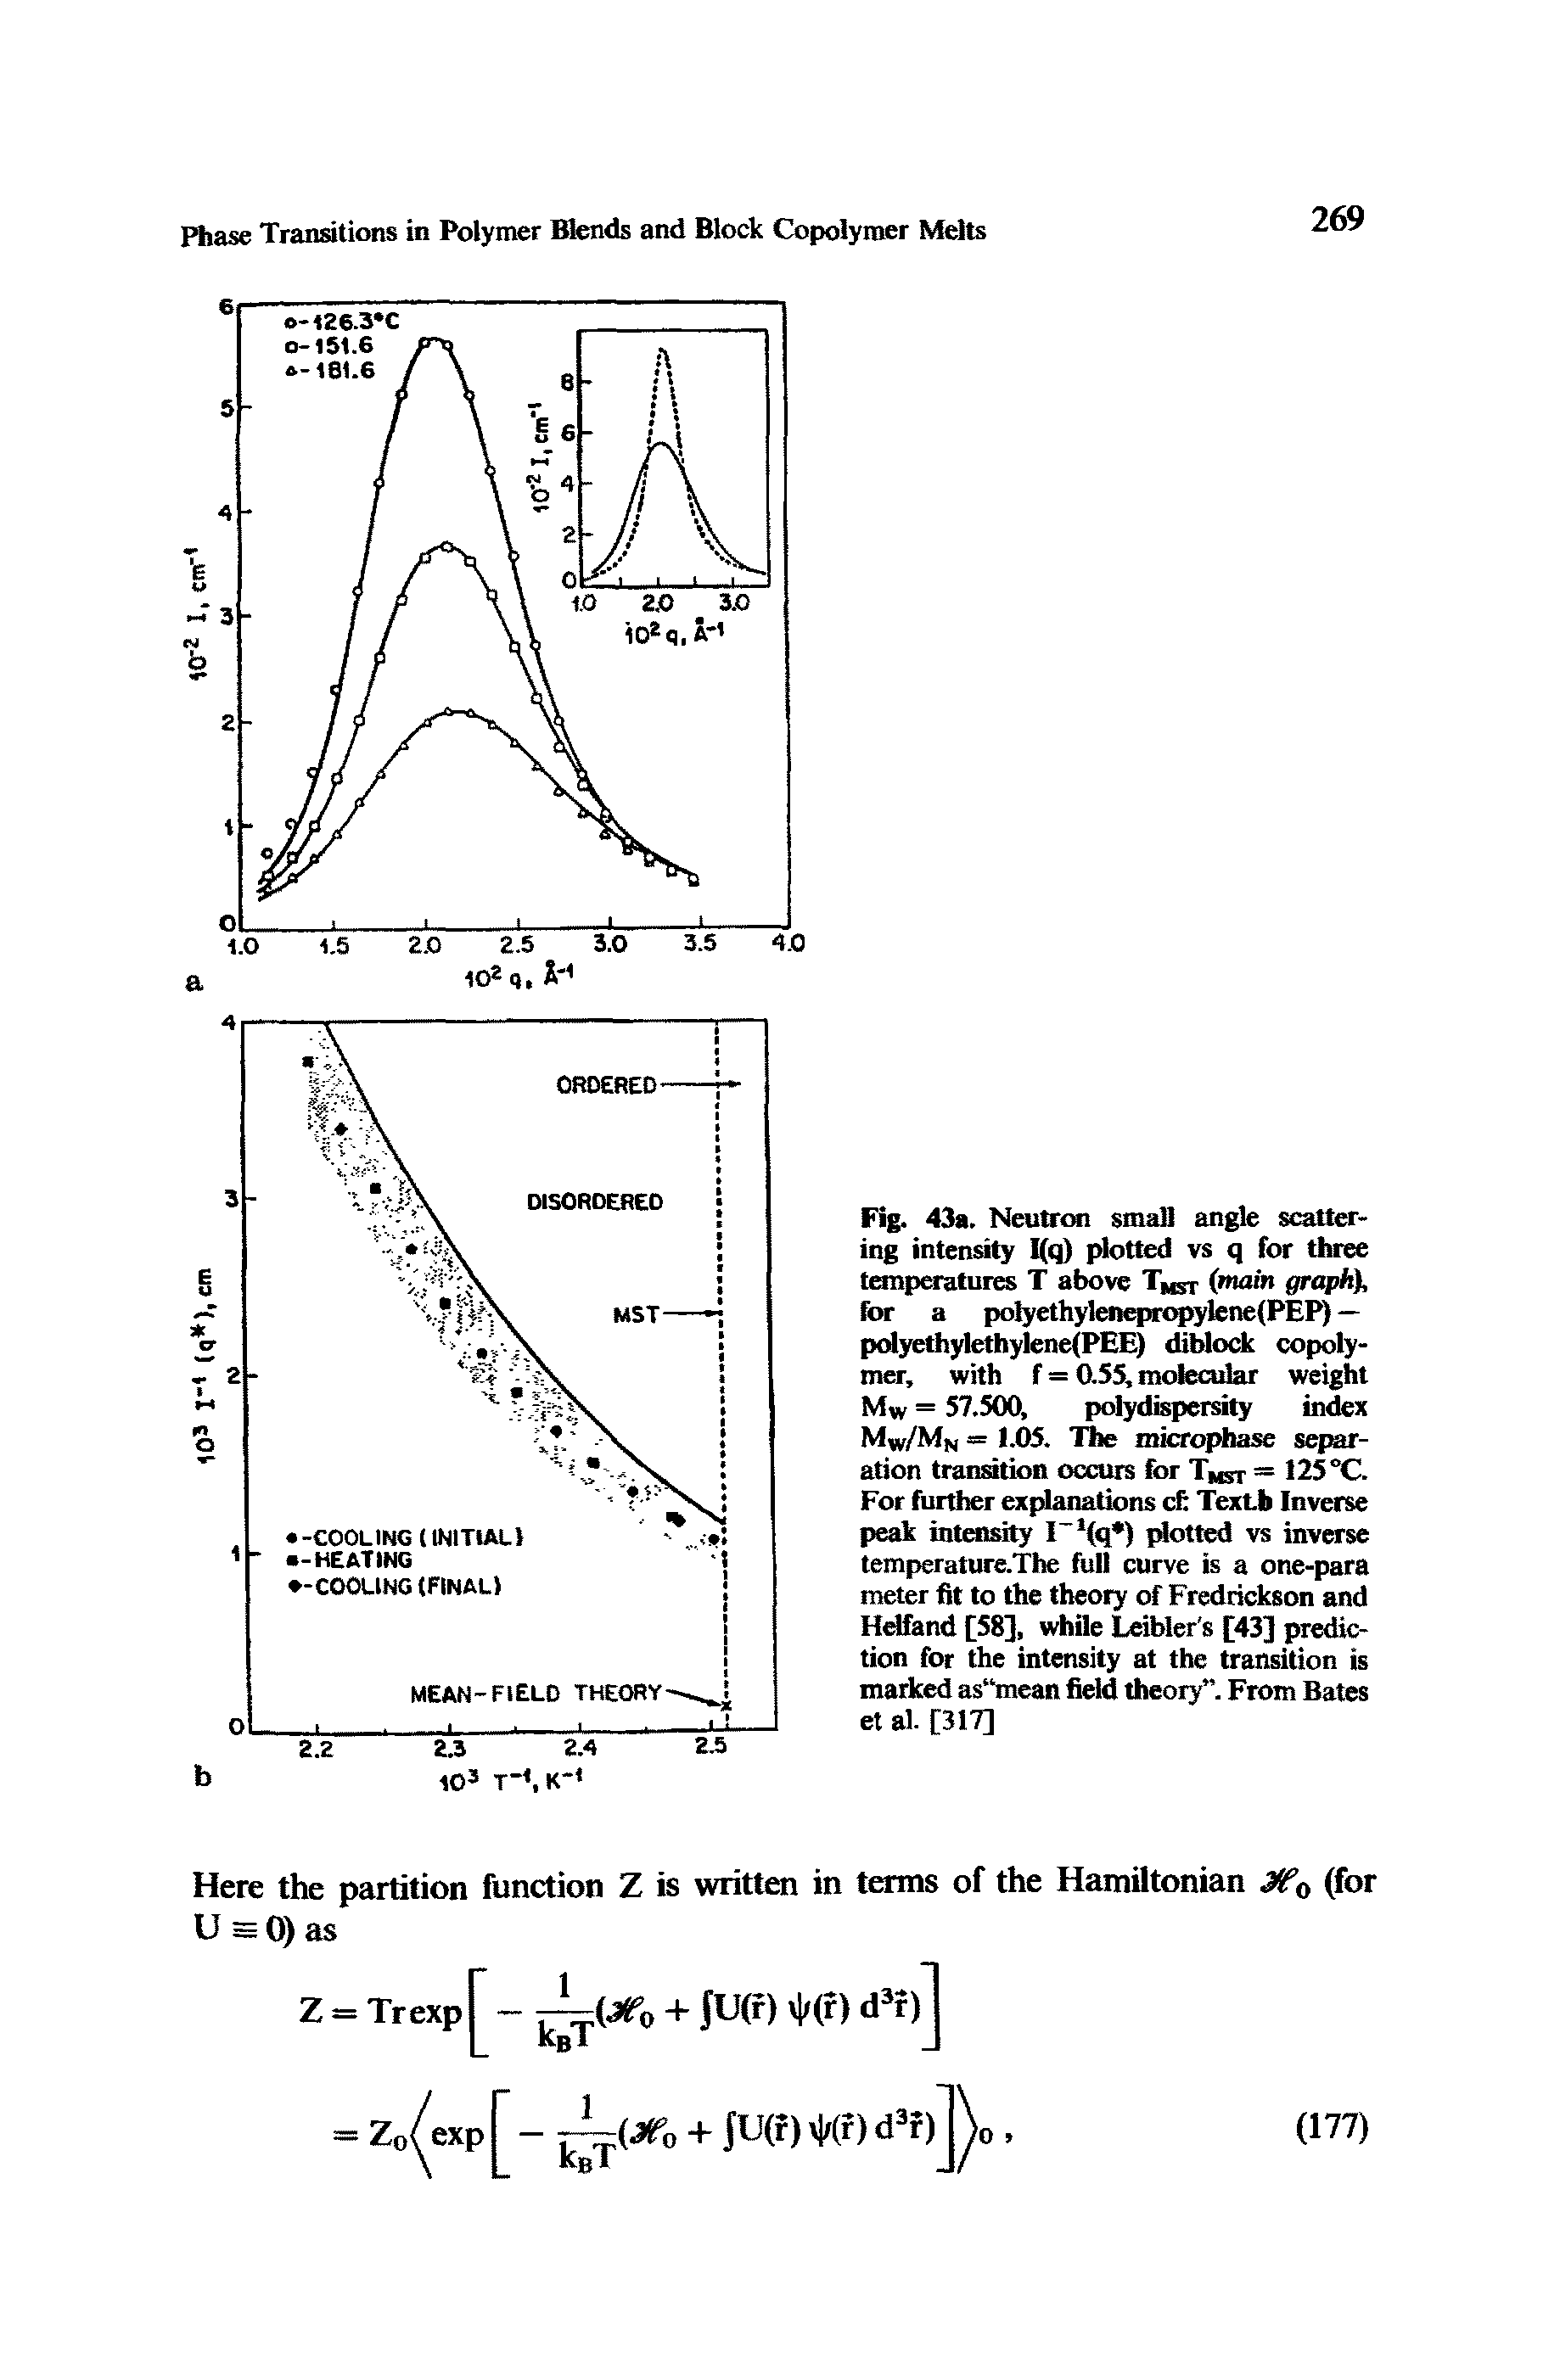 Fig. 43a. Neutron small angle scattering intensity I(q) plotted vs q for three temperatures T above Tmst (main graph), for a polyethylenepropylene(PEP) — polyethylethylene(PEE) diblock copolymer, with f = 0.55, molecular weight Mw — 57.500, polydispersity index Mw/Mn = 1.05. The microphase separation transition occurs for Tmst = 125°C. For further explanations cl Textb Inverse peak intensity I (q ) dotted vs inverse temperature.The full curve is a one-para meter fit to the theoty of Fredrickson and Helfand [58], while Leibler s [43] prediction for the intensity at the transition is marked as mean field theory . From Bates et al. [317]...